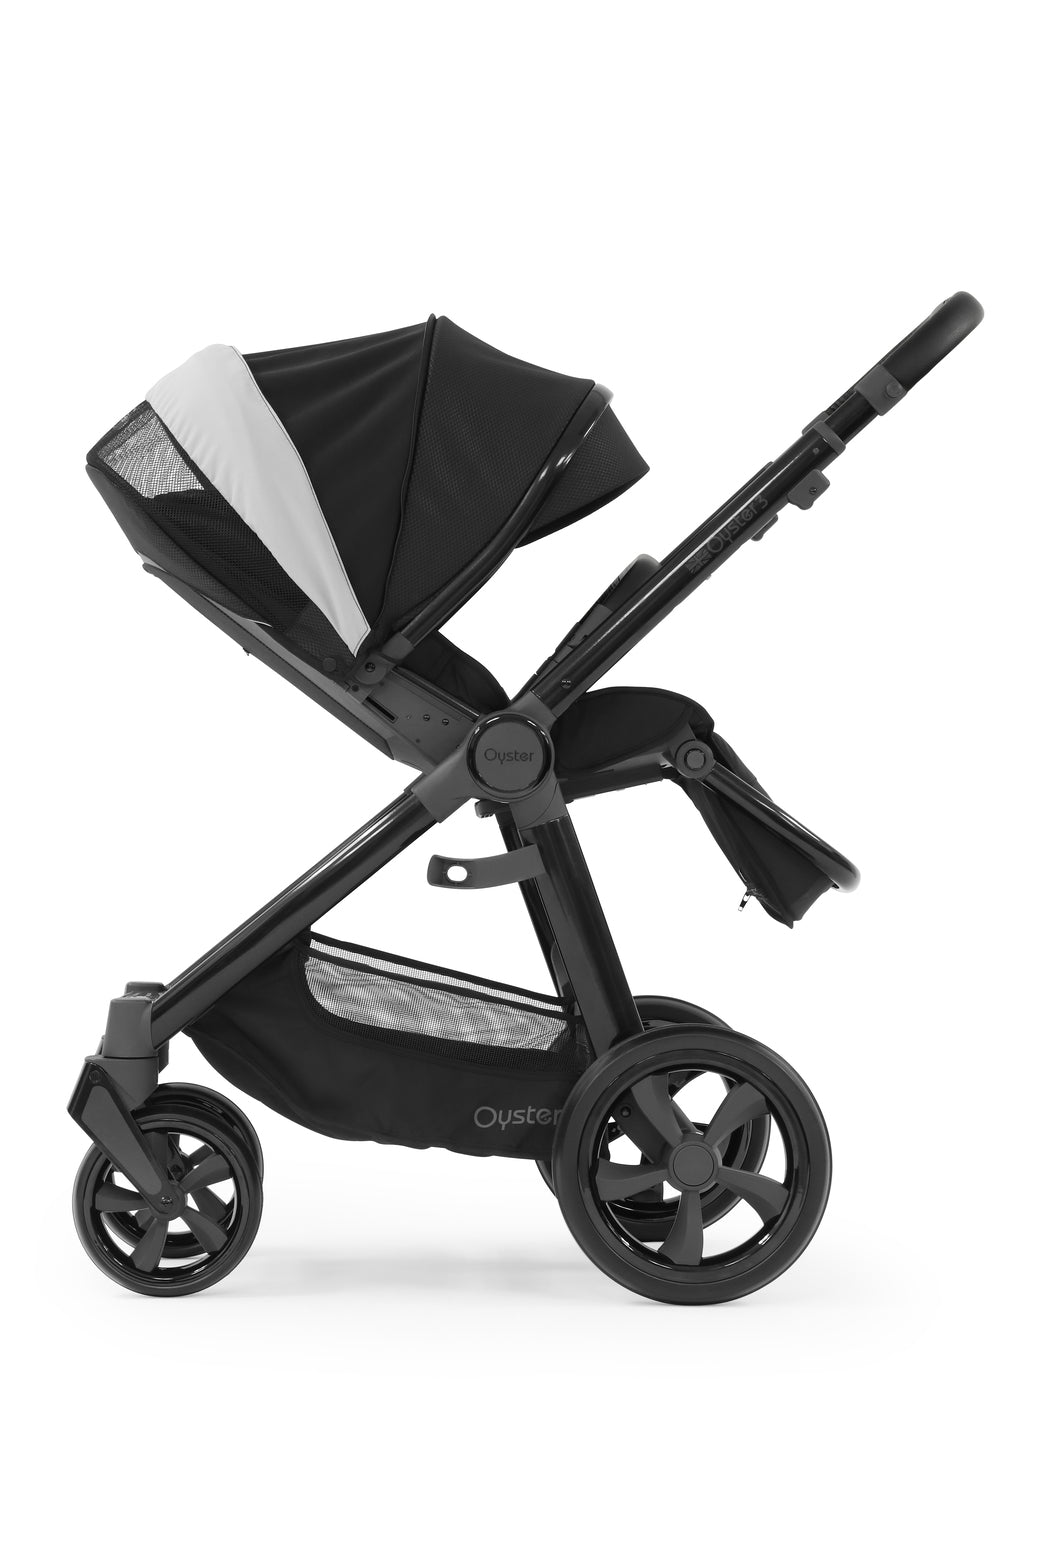 Babystyle Oyster 3 Luxury 7 Piece Travel System Bundle With Cloud T - Pixel - For Your Little One